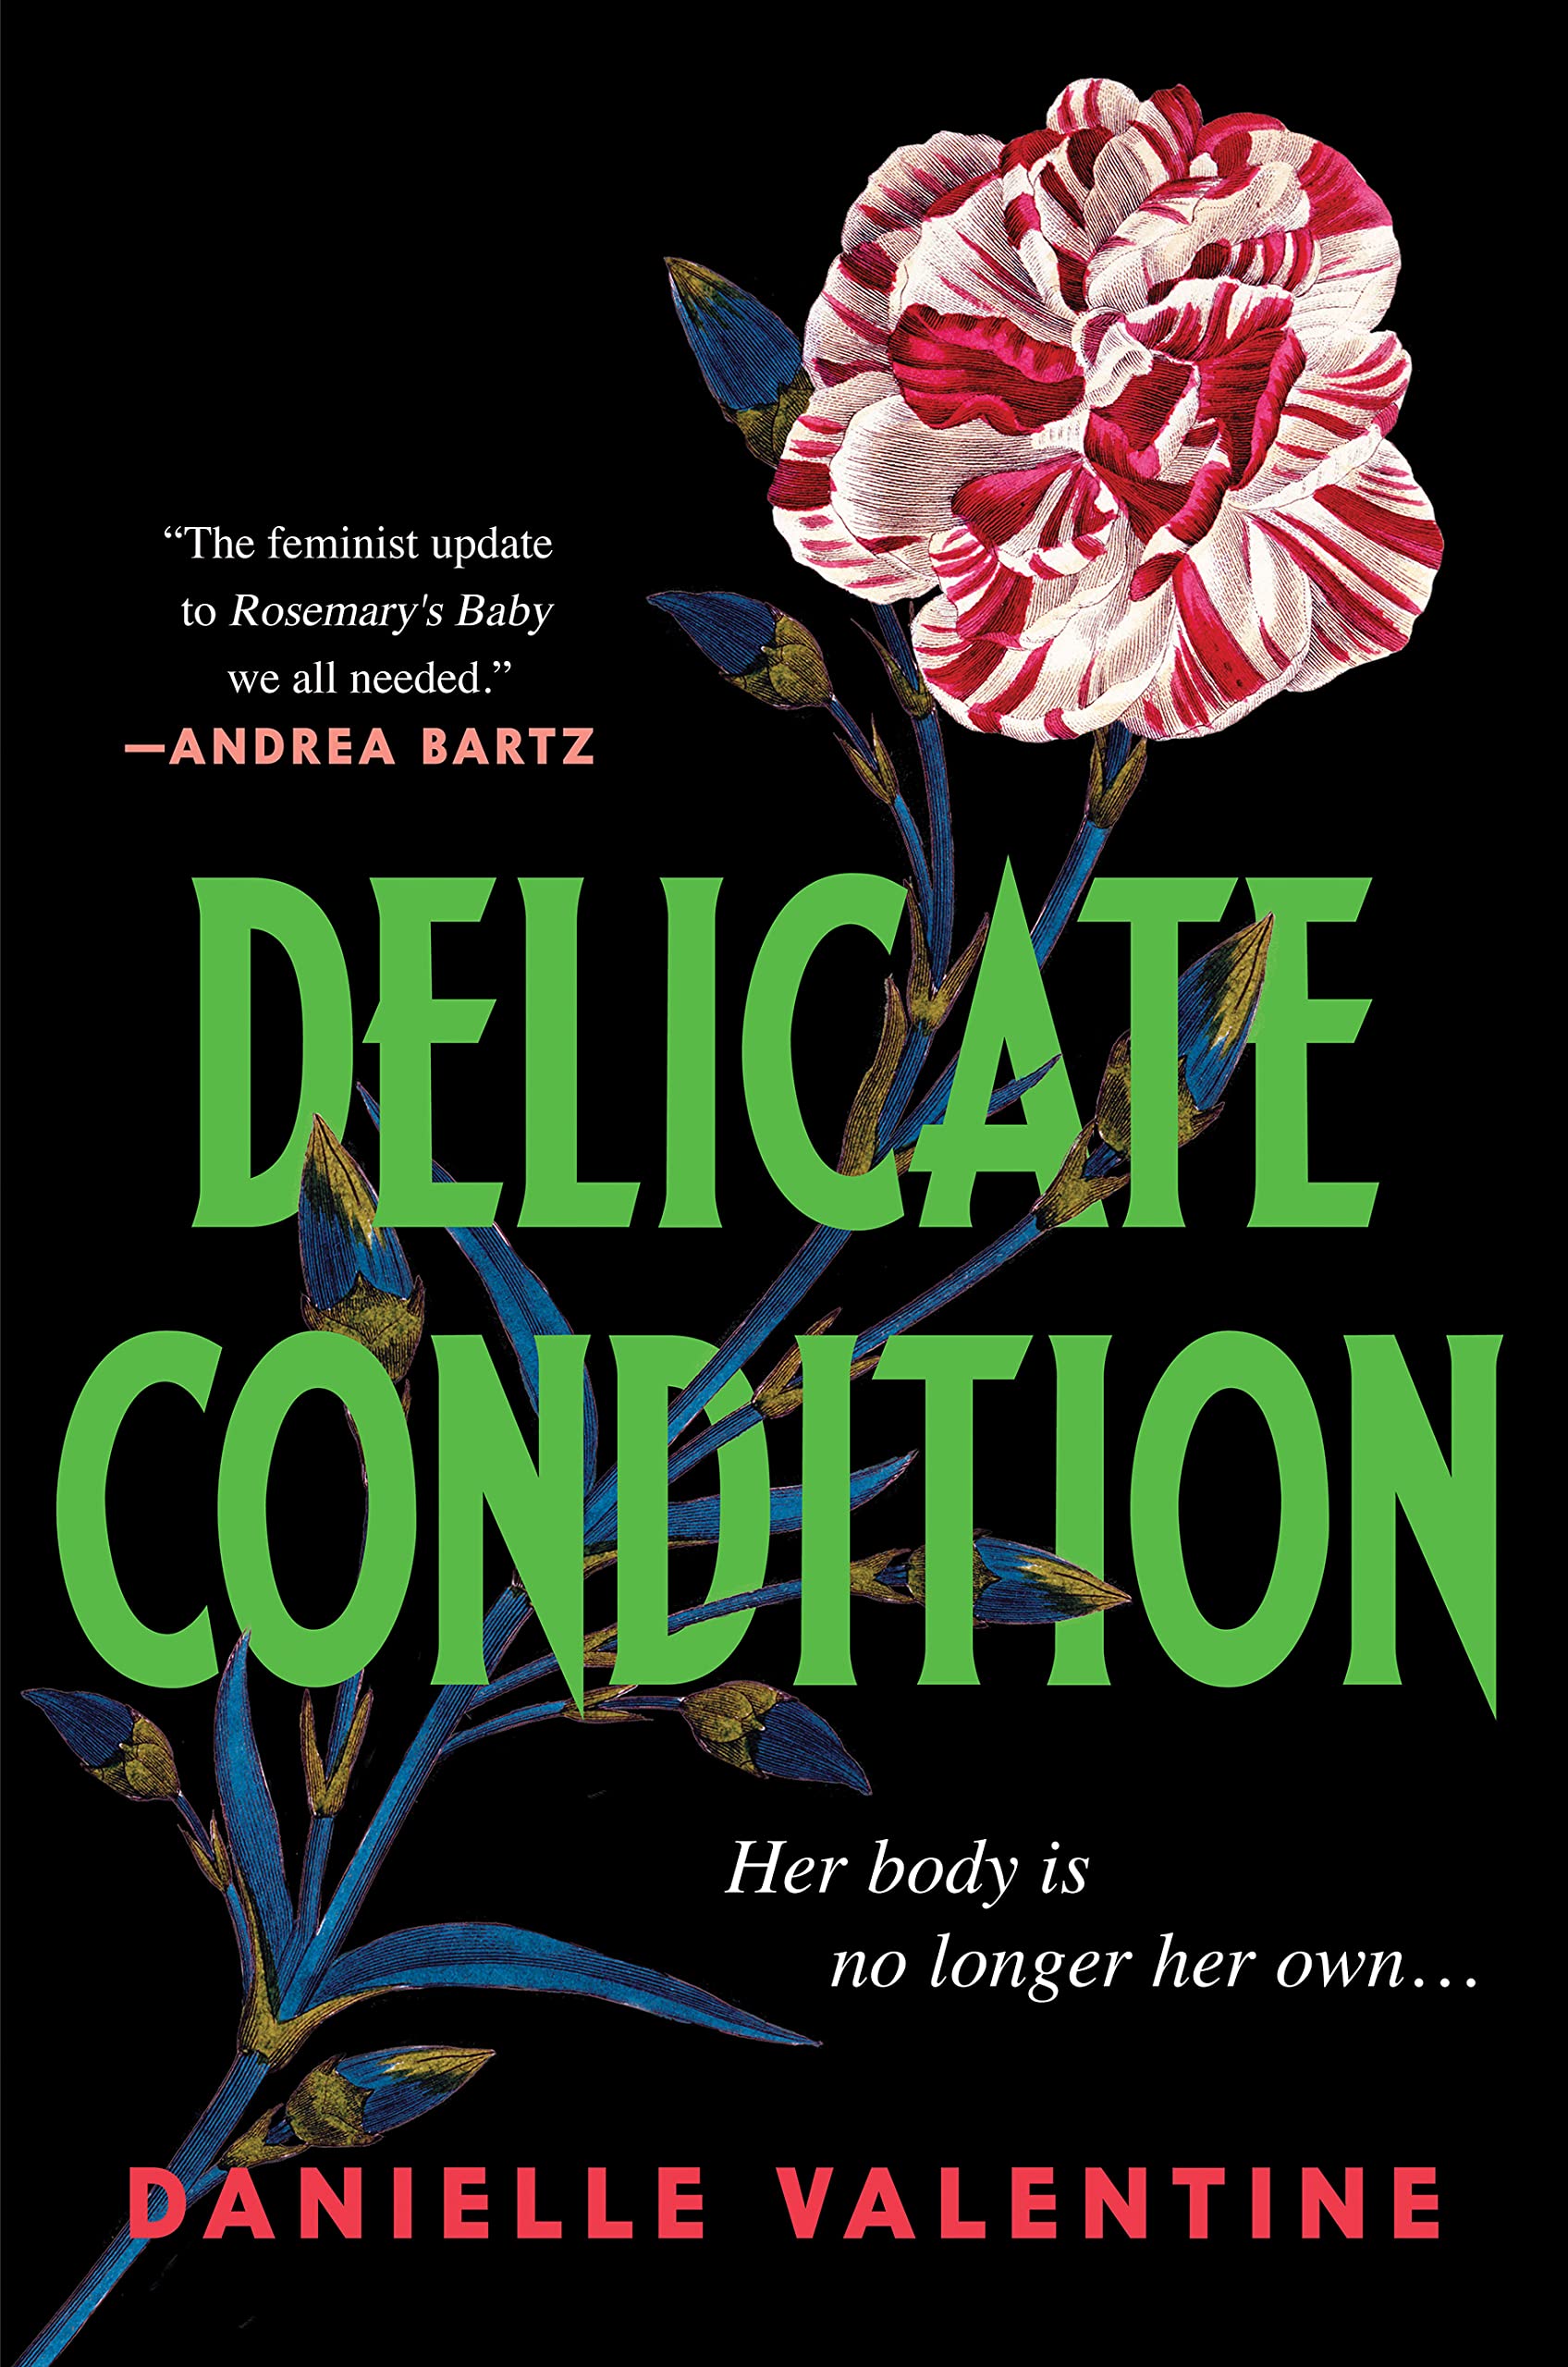 Image for "Delicate Condition"